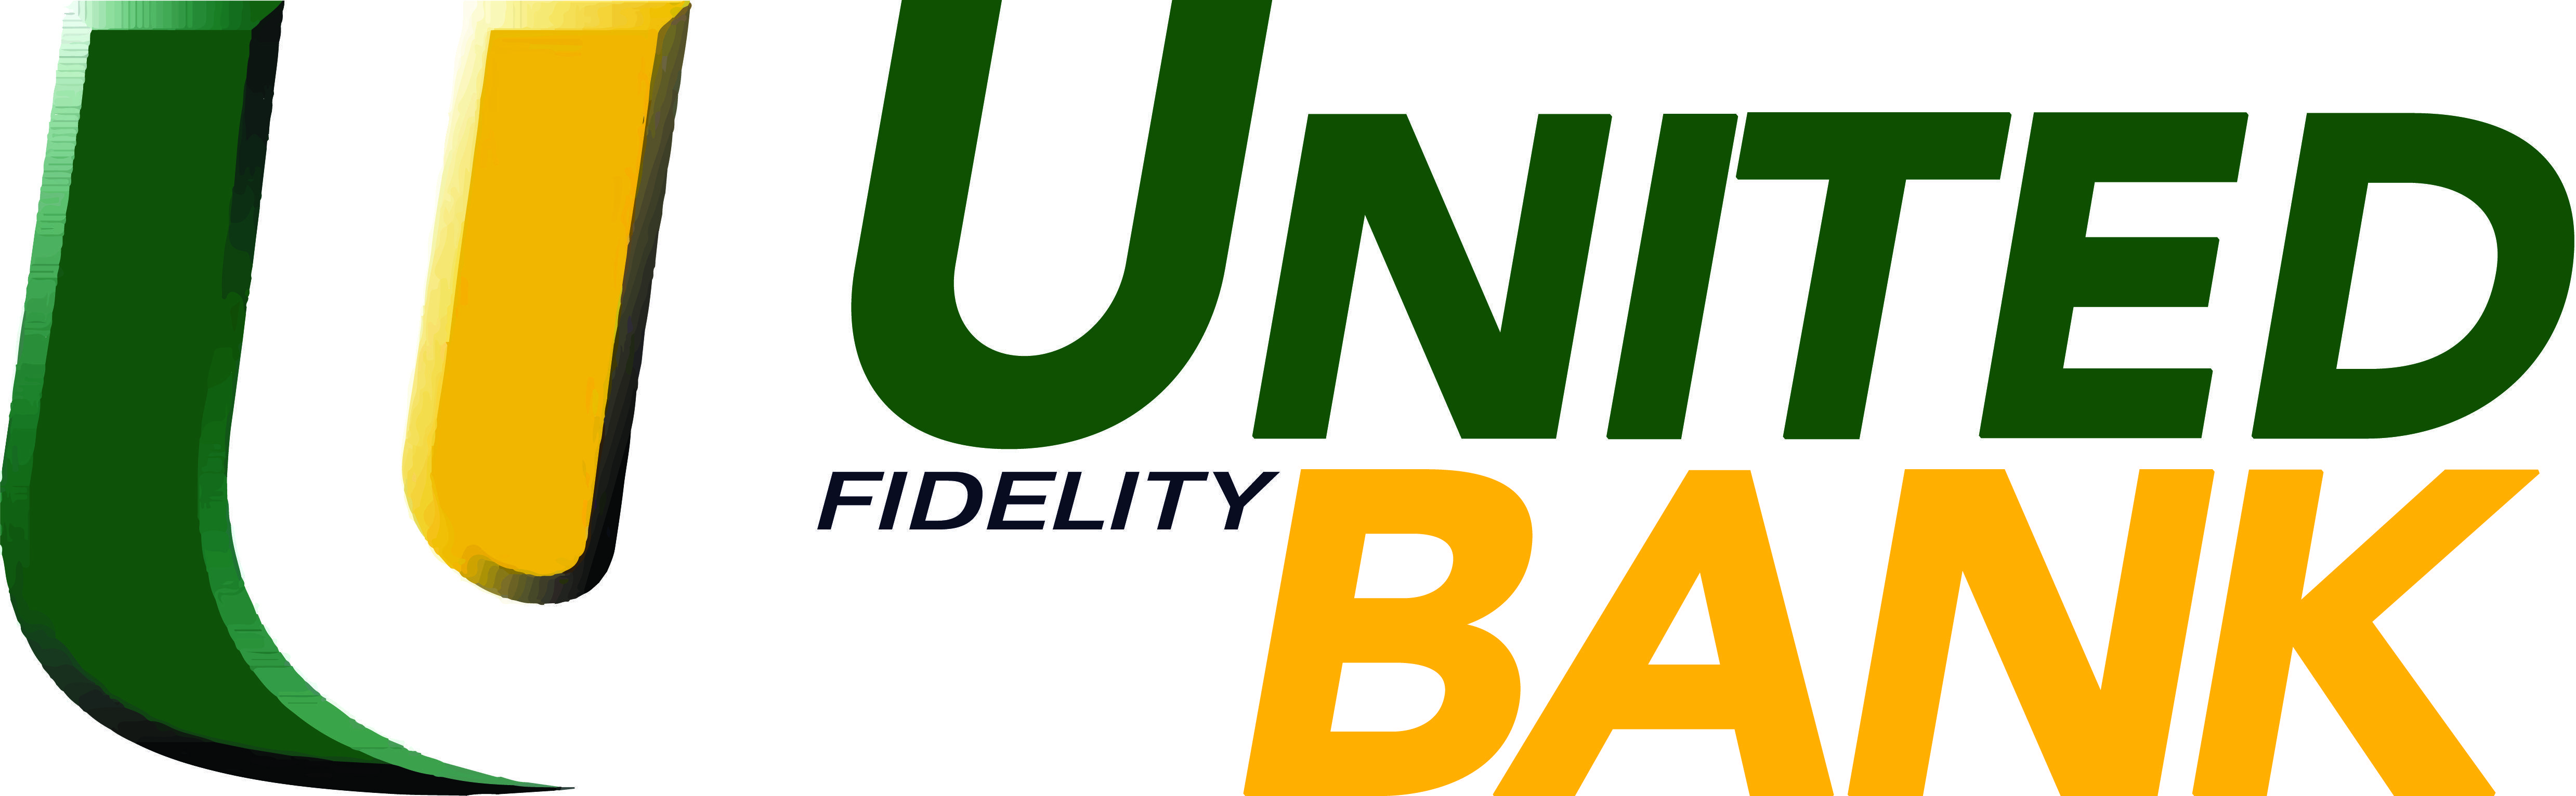 Green and Yellow Bank Logo - UNITED FIDELITY BANK TO REOPEN LOBBY OF HALSTED BRANCH | Chicago ...